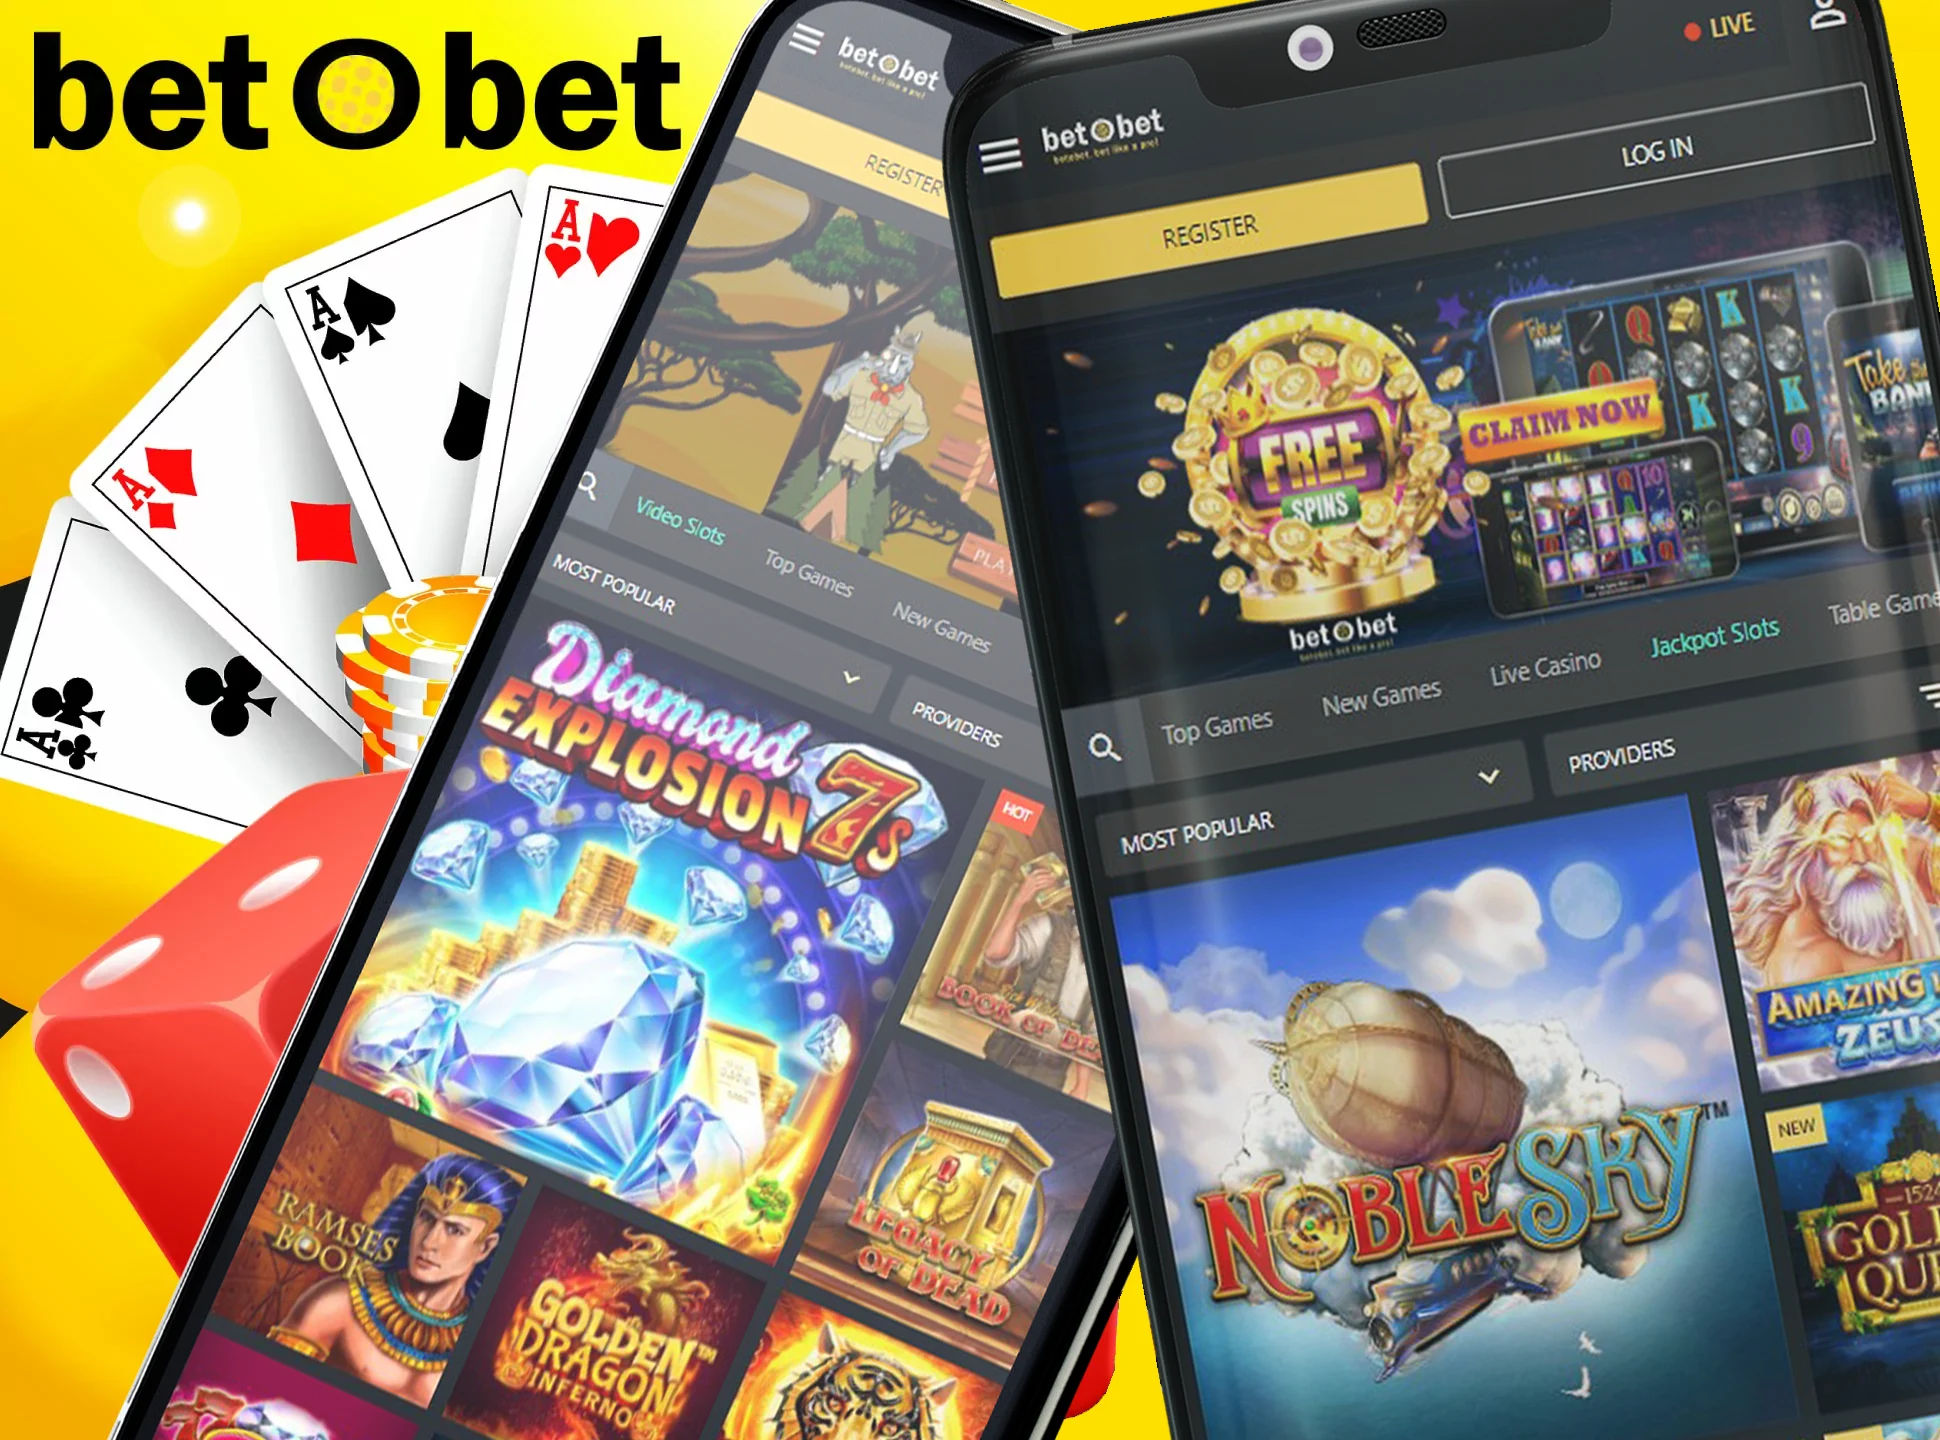 Follow our guide to install the BetoBet mobile app on your mobile device.